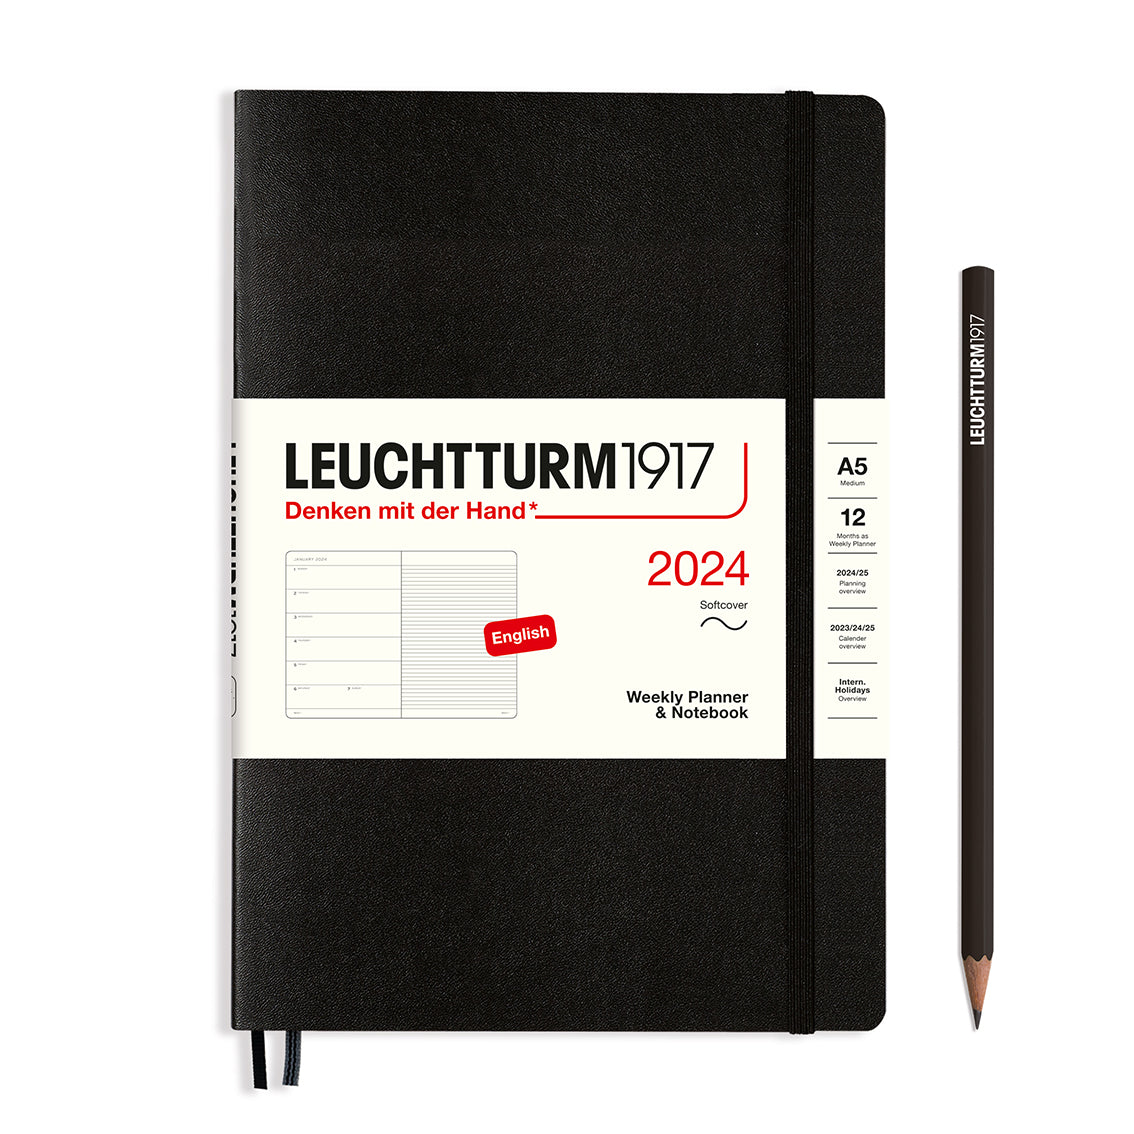 An image of a black planner with a black elastic band holding it together and a cream paper wrap around the middle stating the business name Leuchtturm1917, that it is for the year 2024, it is a weekly planner and notebook, is A5 in size and an English language version. It has an image on the wrap showing the inside layout which is a week on the left hand page and a notes page on thr right hand page. A black pencil is shown at the side of the planner.